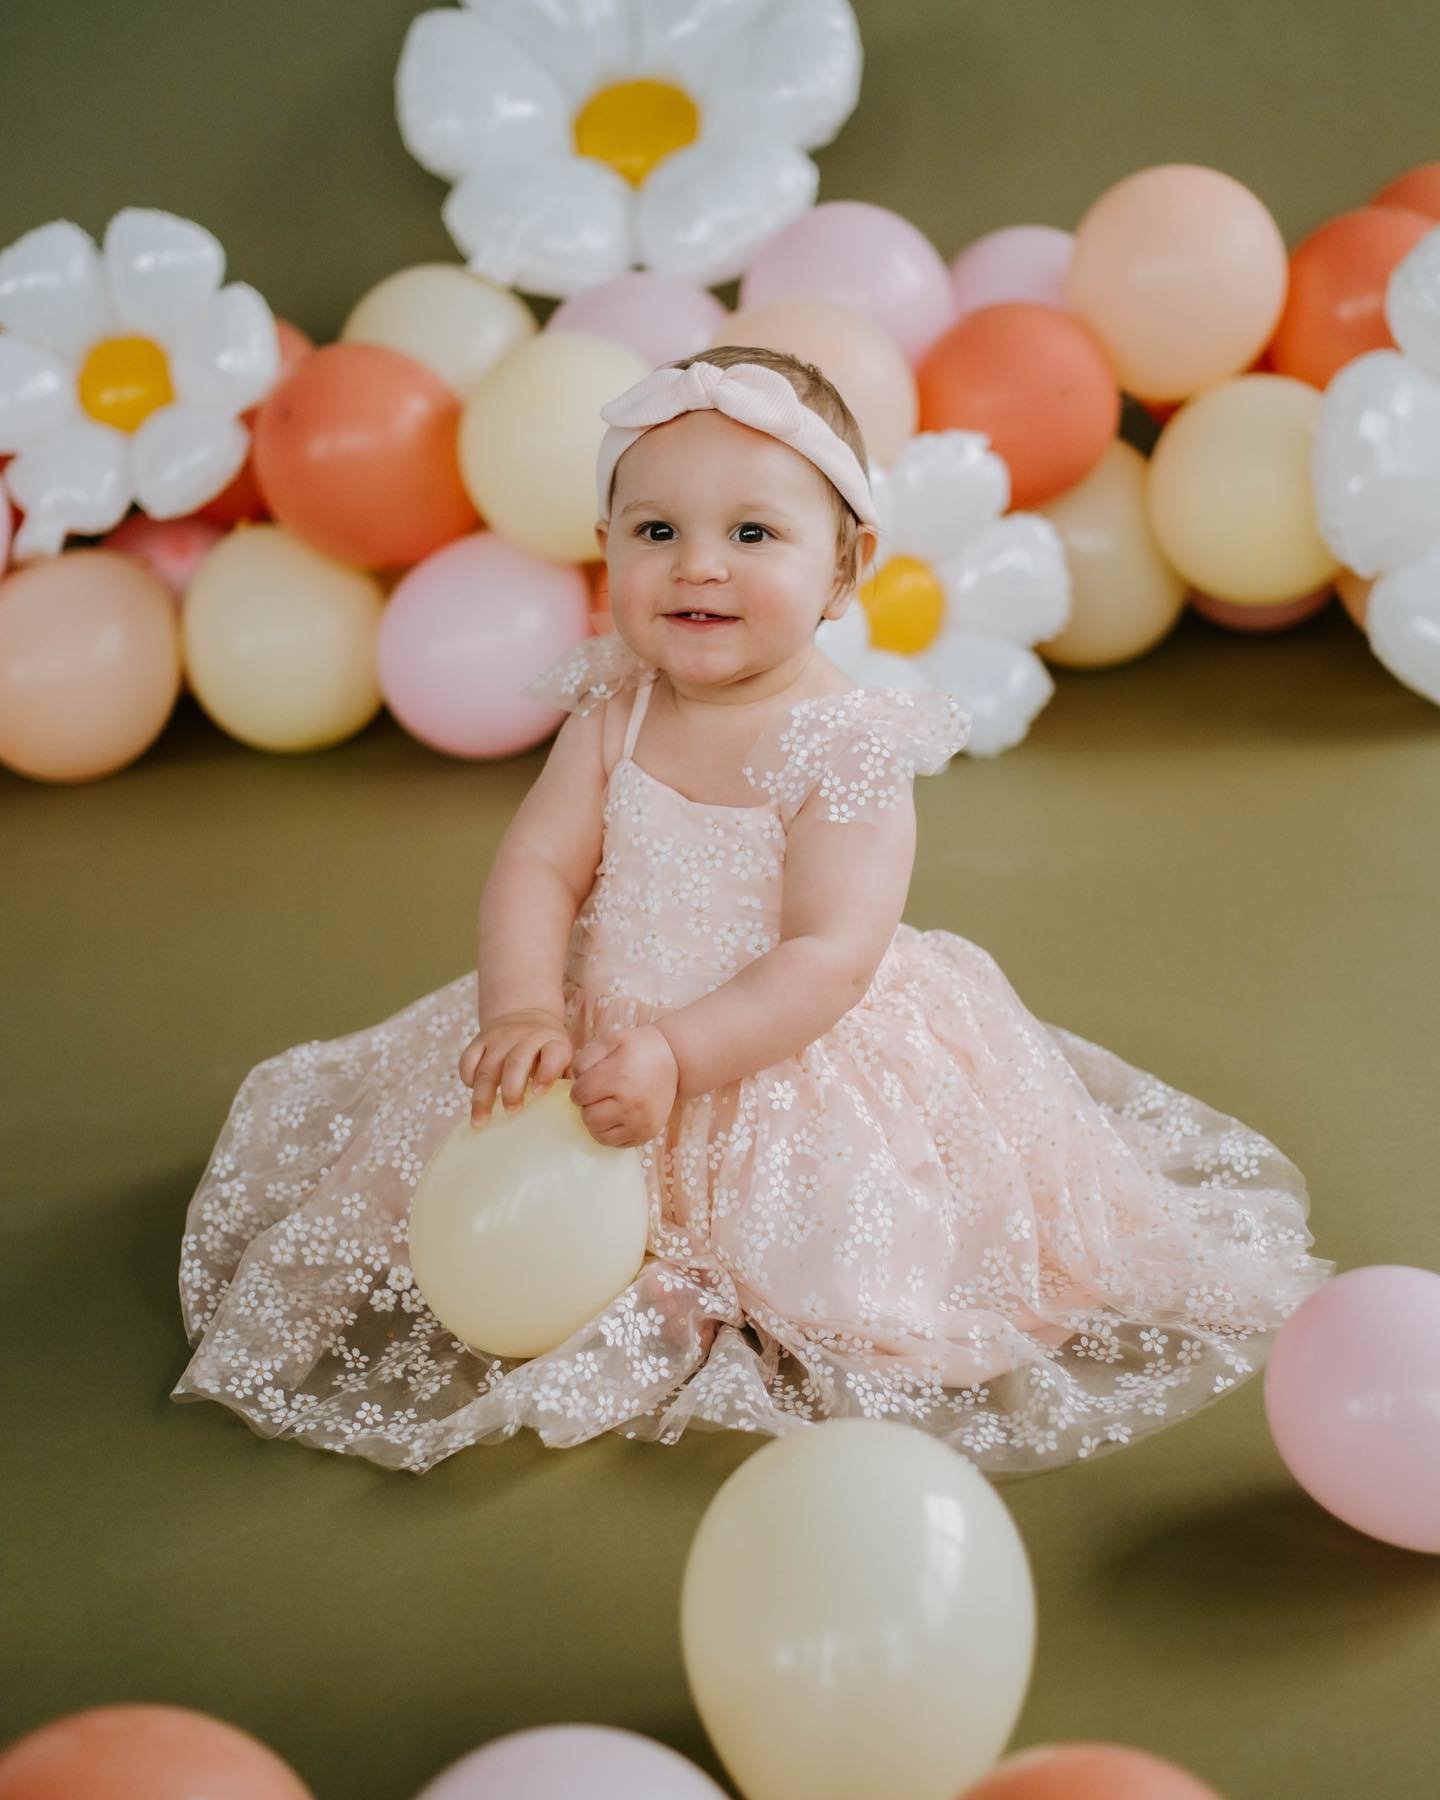 Swipe to the end to see just how hard this sweet pea celebrated her first birthday 🎂